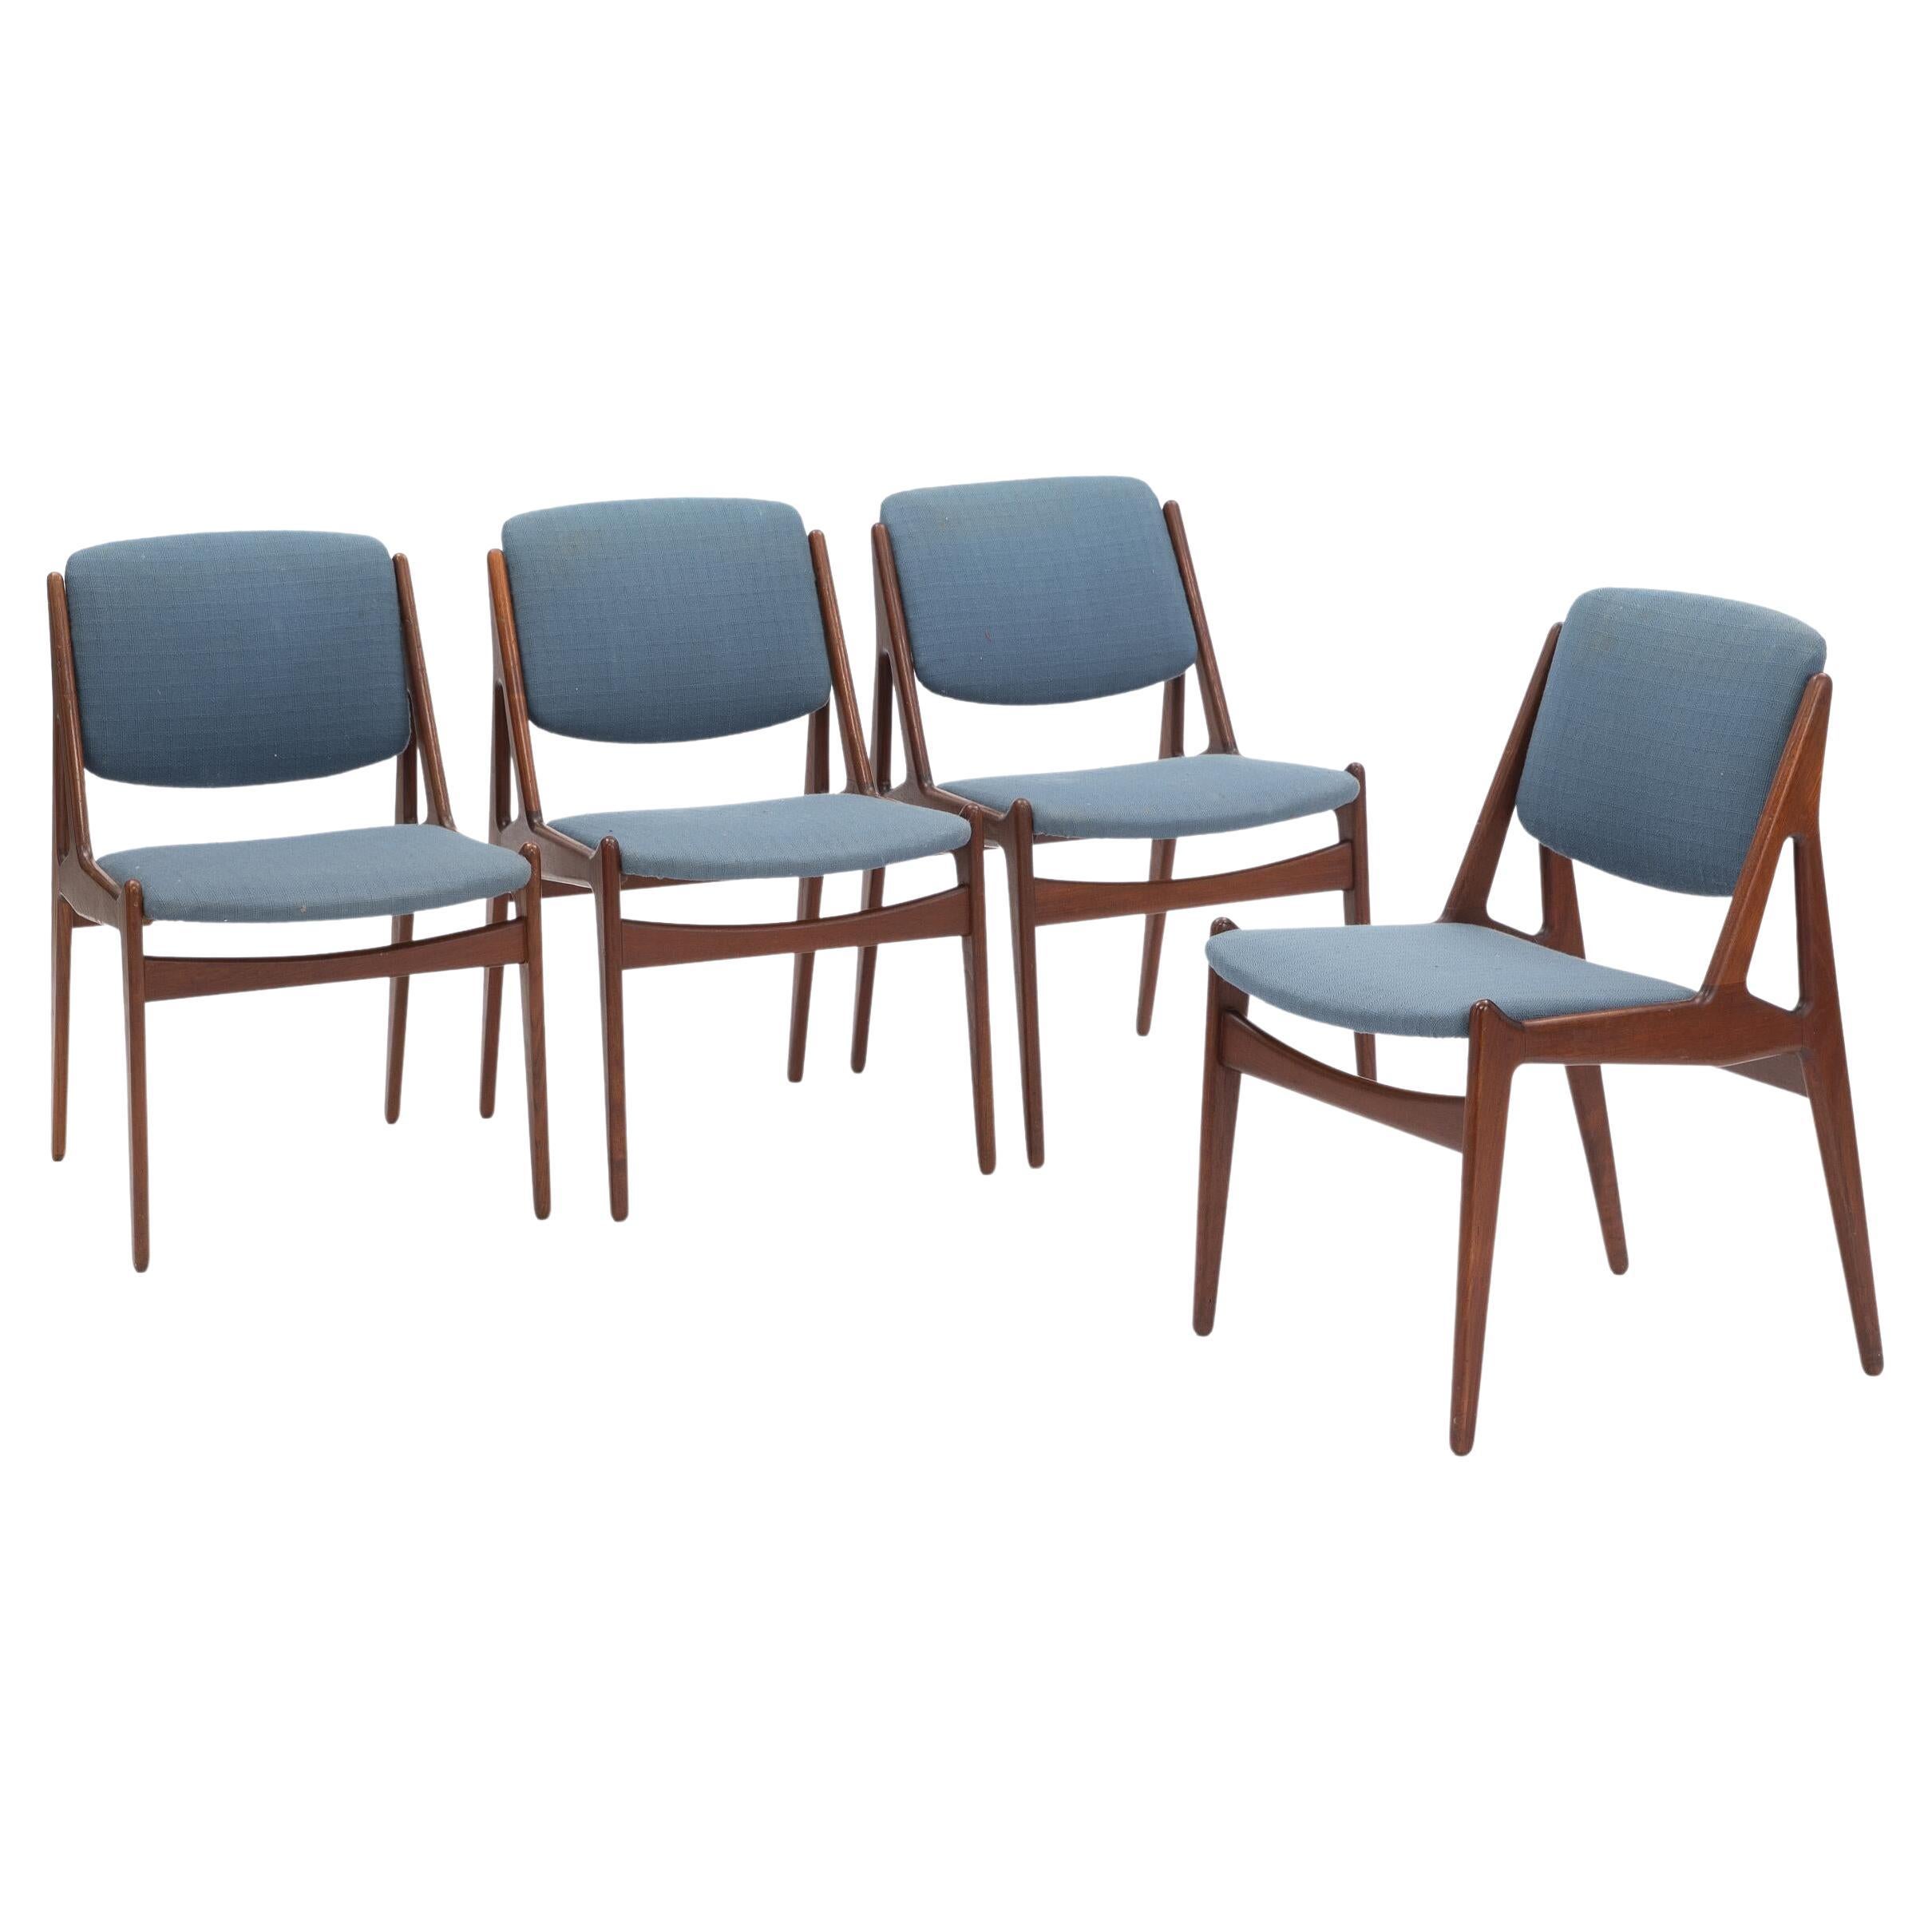 4x Danish Teak Dining Chairs by Arne Vodder, 1950s For Sale